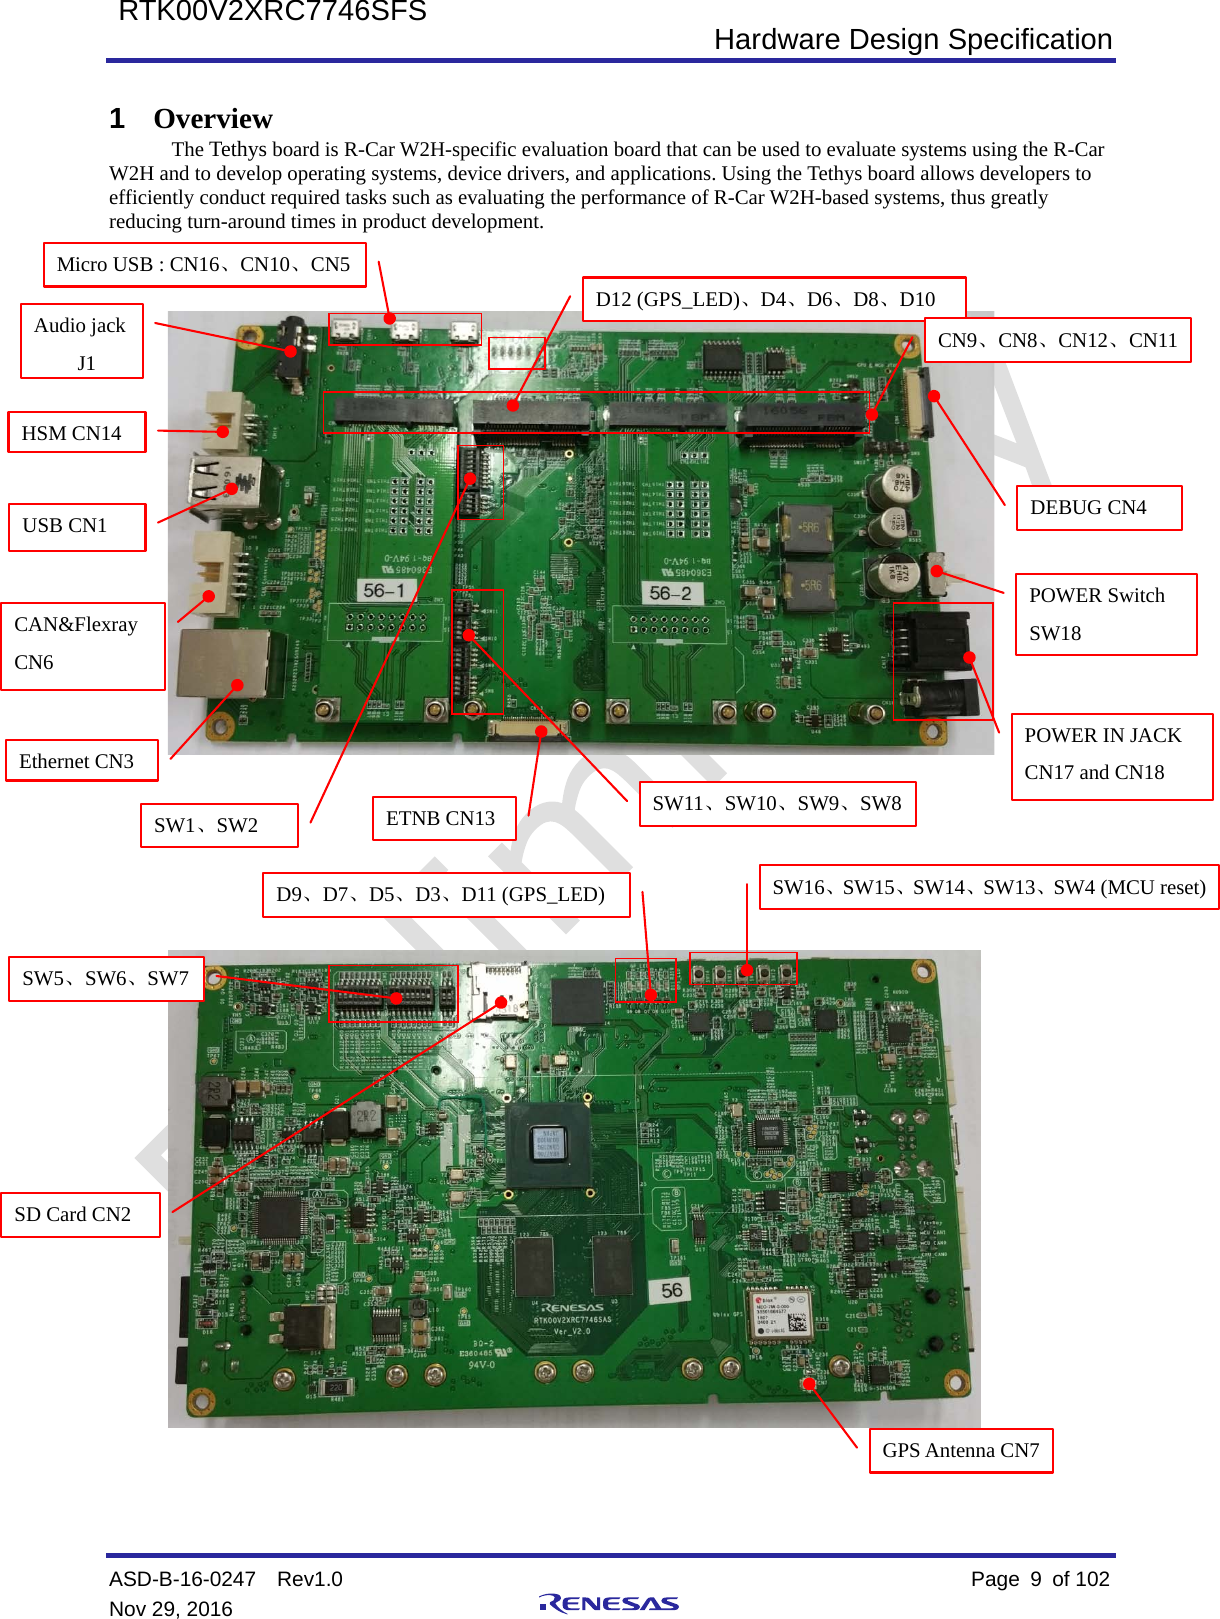  Hardware Design Specification ASD-B-16-0247  Rev1.0    Page  9  of 102 Nov 29, 2016     RTK00V2XRC7746SFS   1  Overview   The Tethys board is R-Car W2H-specific evaluation board that can be used to evaluate systems using the R-Car W2H and to develop operating systems, device drivers, and applications. Using the Tethys board allows developers to efficiently conduct required tasks such as evaluating the performance of R-Car W2H-based systems, thus greatly reducing turn-around times in product development.          SD Card CN2 GPS Antenna CN7 HSM CN14 CAN&amp;Flexray CN6 Ethernet CN3 Audio jack   J1 USB CN1  DEBUG CN4 POWER Switch SW18 POWER IN JACK CN17 and CN18   Micro USB : CN16、CN10、CN5 ETNB CN13 D12 (GPS_LED)、D4、D6、D8、D10   CN9、CN8、CN12、CN11   SW1、SW2  SW11、SW10、SW9、SW8 SW16、SW15、SW14、SW13、SW4 (MCU reset)   D9、D7、D5、D3、D11 (GPS_LED)   SW5、SW6、SW7 